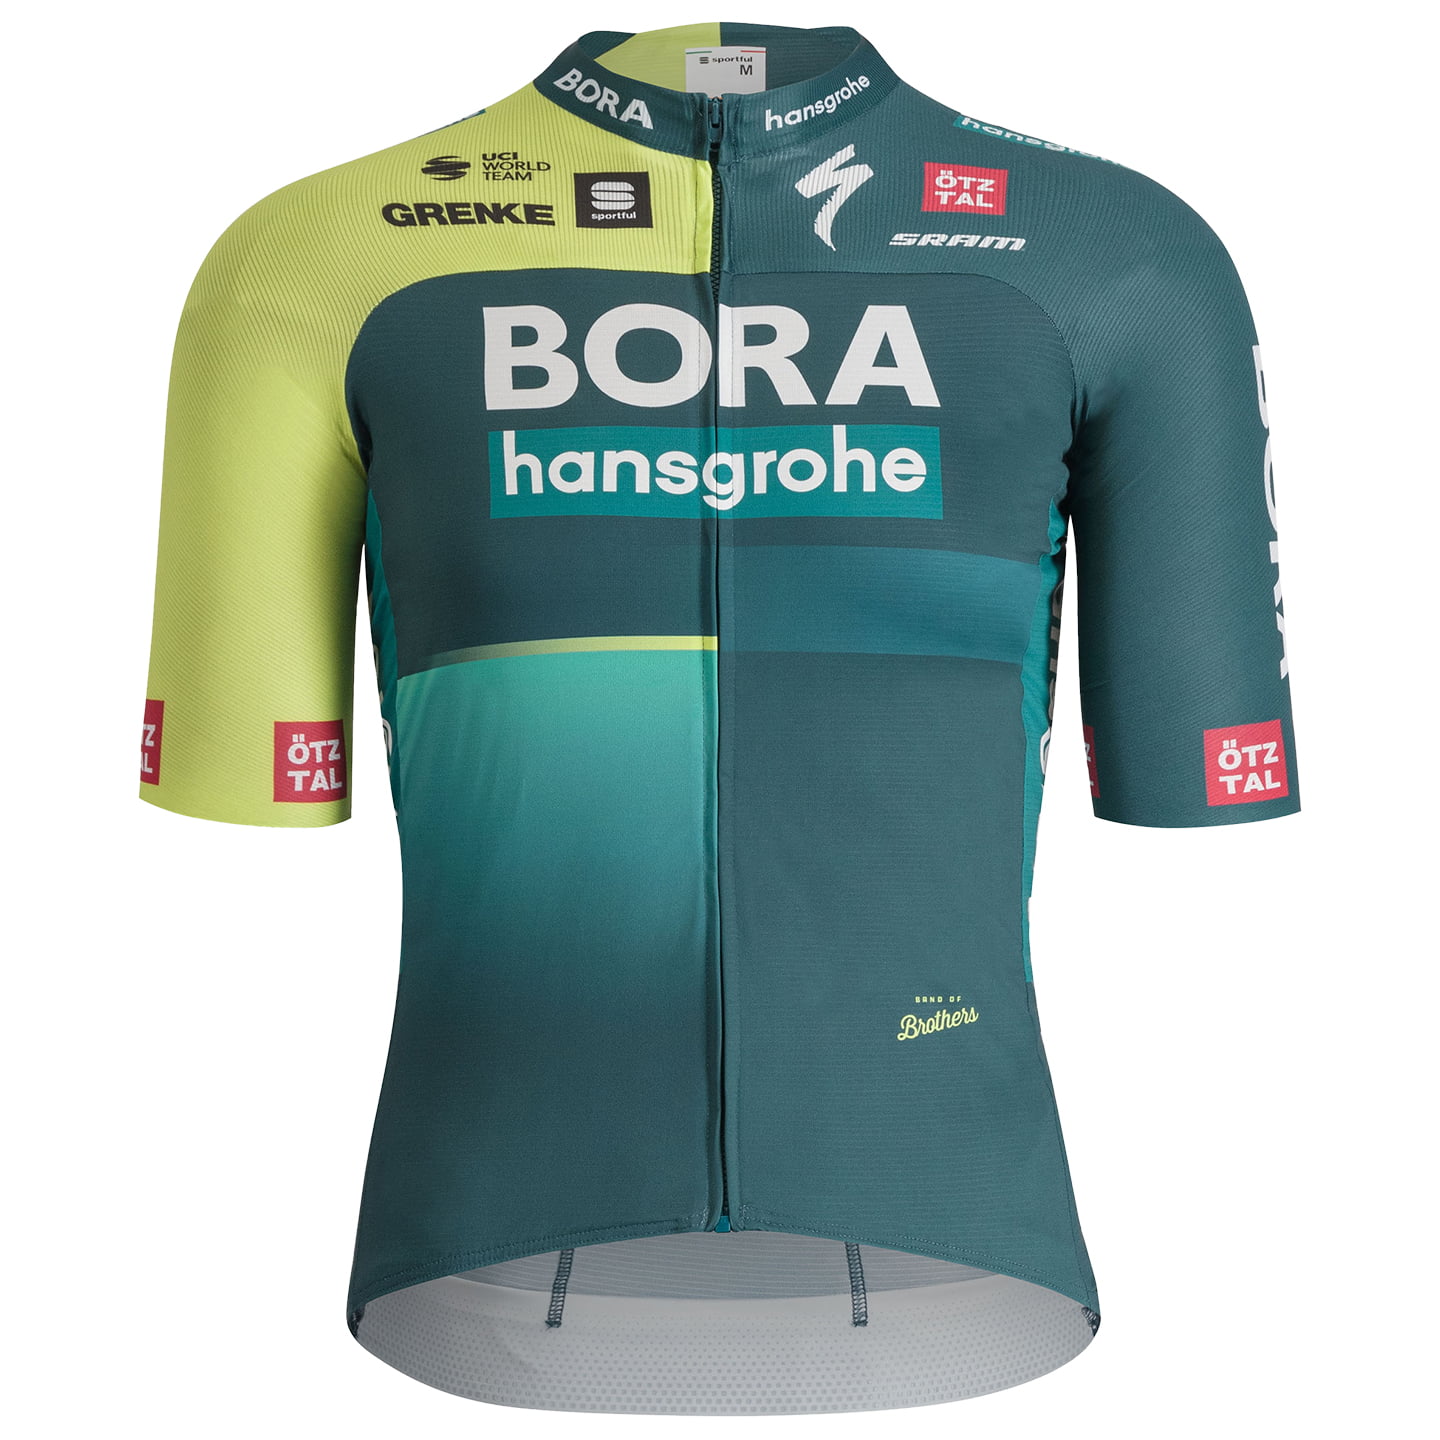 BORA-hansgrohe 2024 Short Sleeve Jersey, for men, size S, Cycling jersey, Cycling clothing